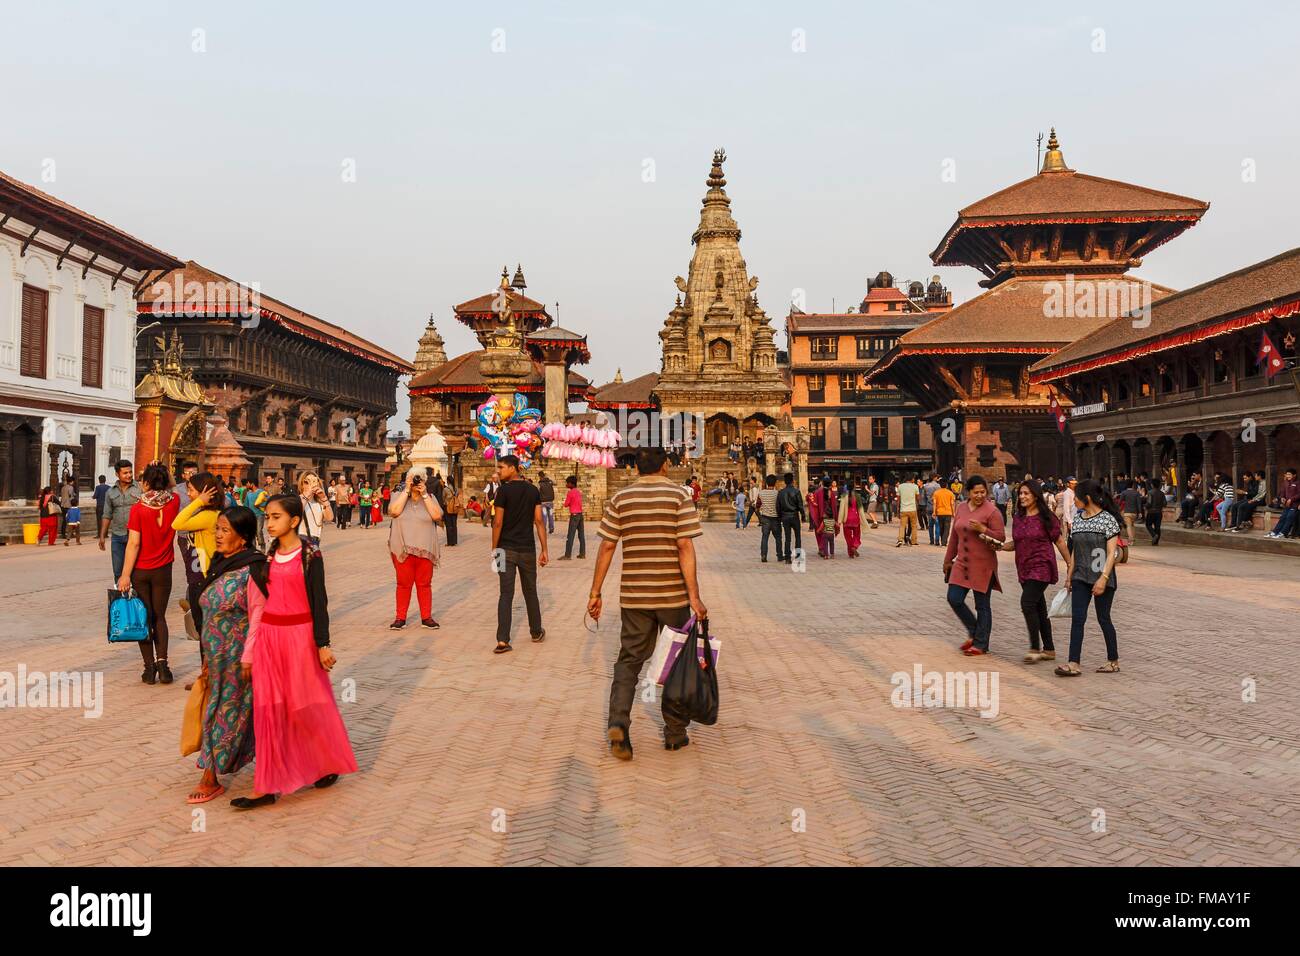 Nepal, Bagmati zone, Bhaktapur, listed as World Heritage by UNESCO, Durbar Square Stock Photo